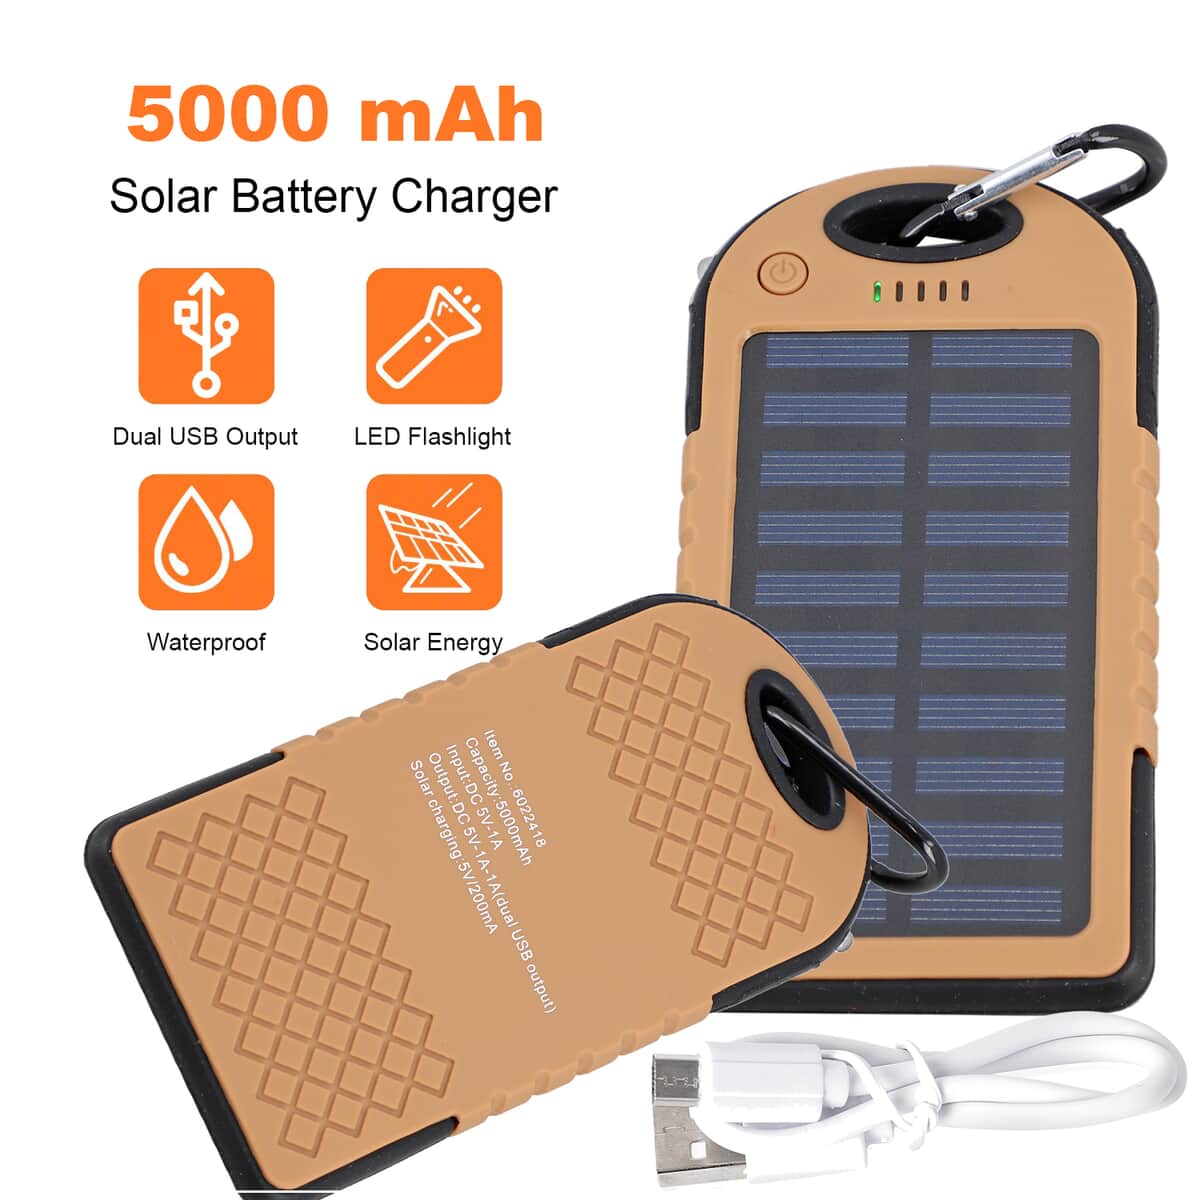 Homesmart Camel Color Carabiner Solar 5000 mAh Battery Charger with USB & Emergency LED Torch image number 1